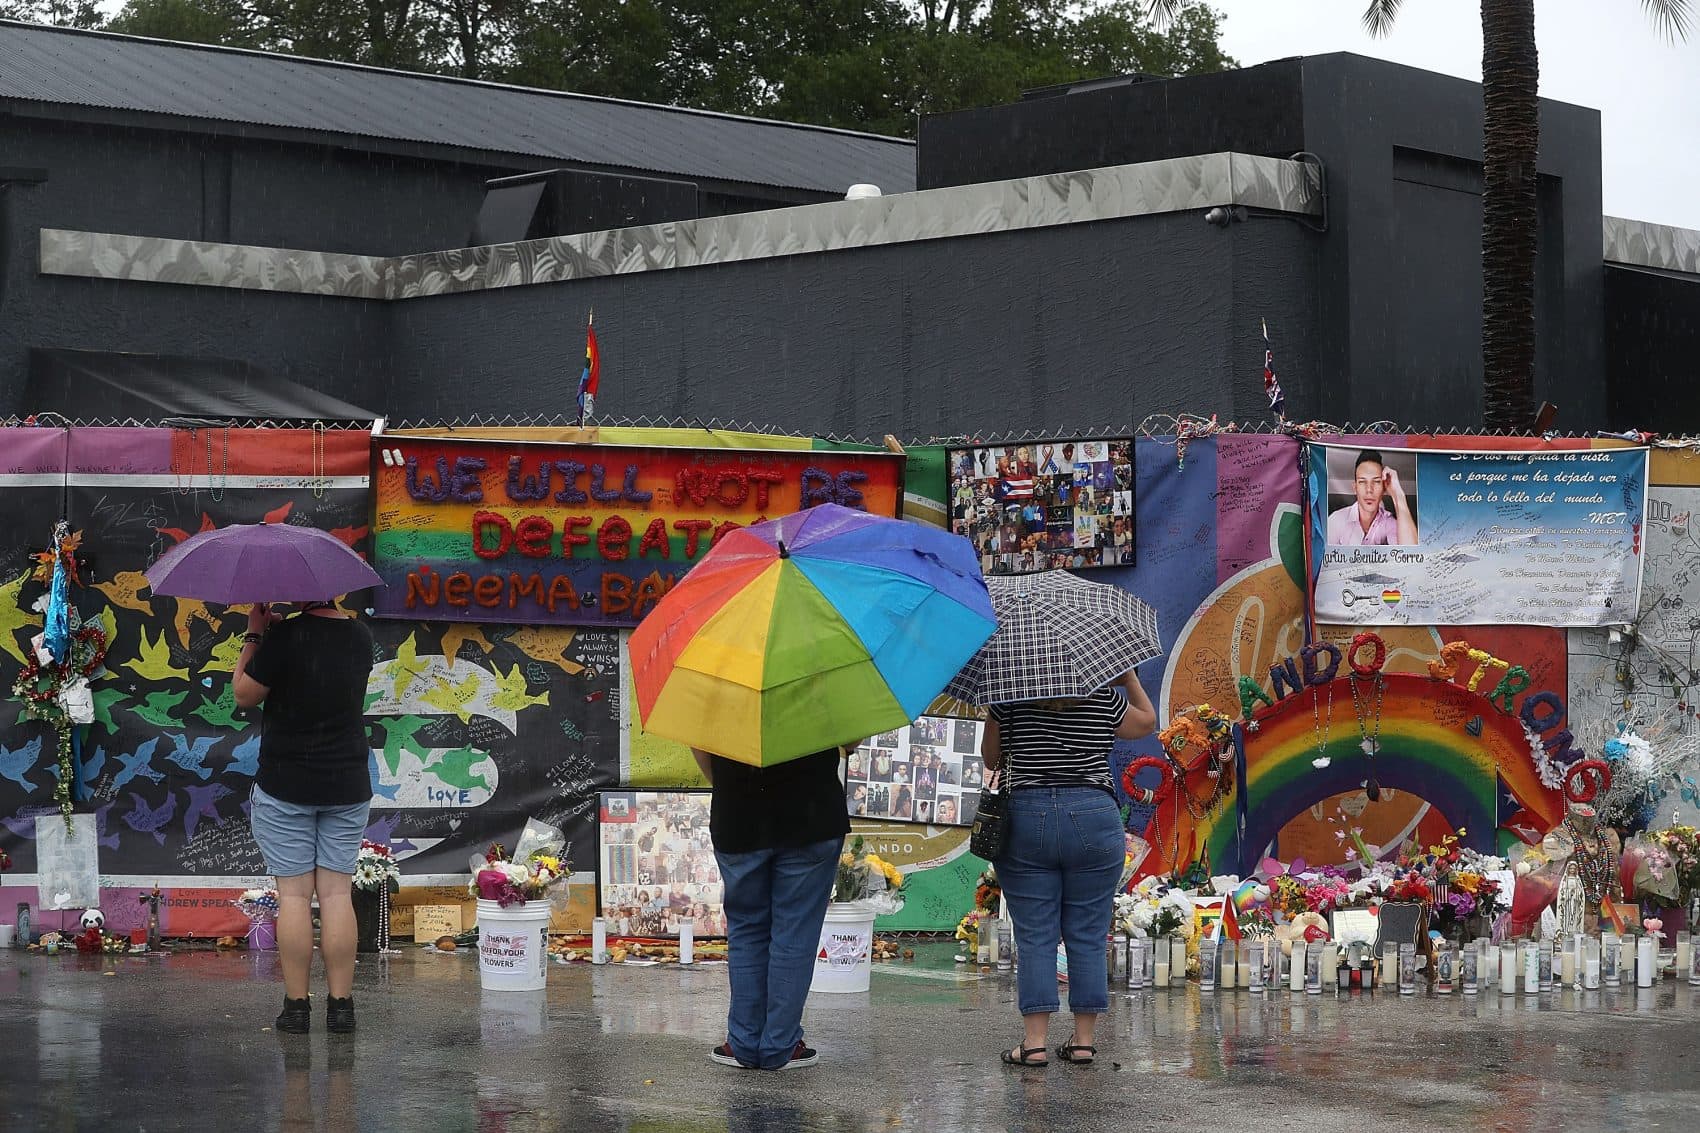 People visit the memorial to the victims of the Pulse nightclub shooting one day before the one-year anniversary of the shooting on June 11, 2017, in Orlando. (Joe Raedle/Getty Images)